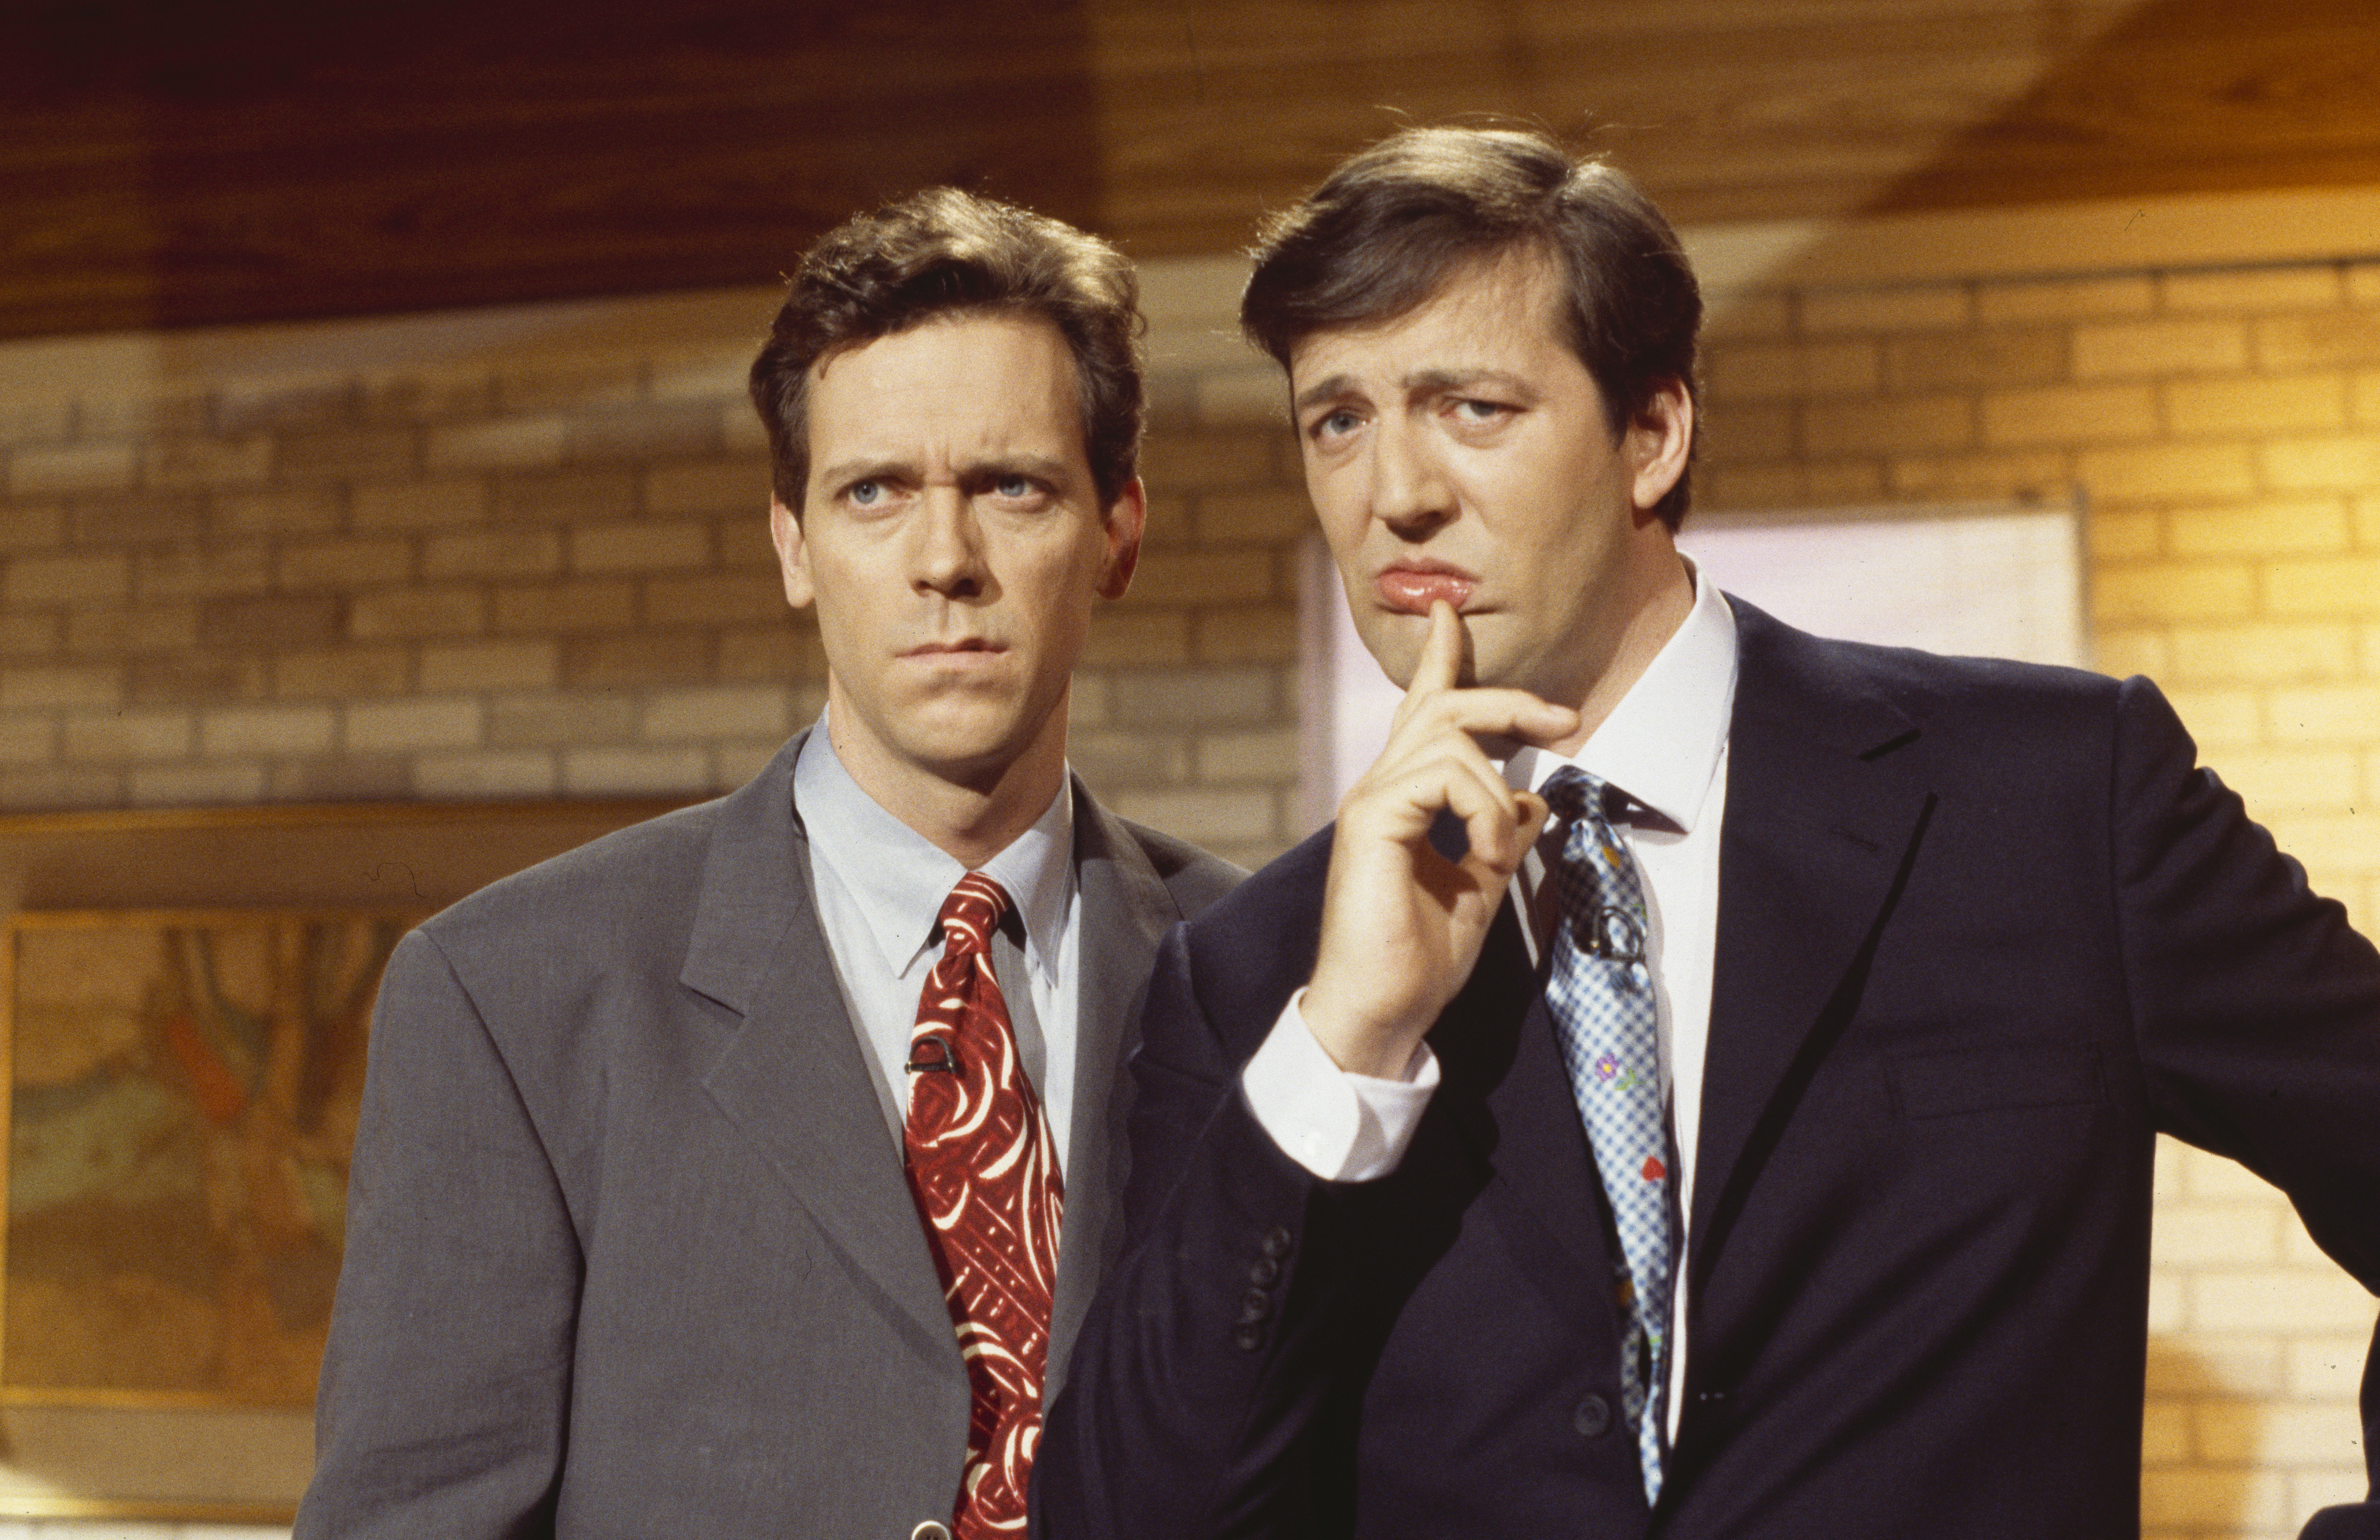 Hugh Laurie and Stephen Fry in a sketch from the BBC television series "A Bit of Fry and Laurie" on March 29th 1994. | Source: Getty Images